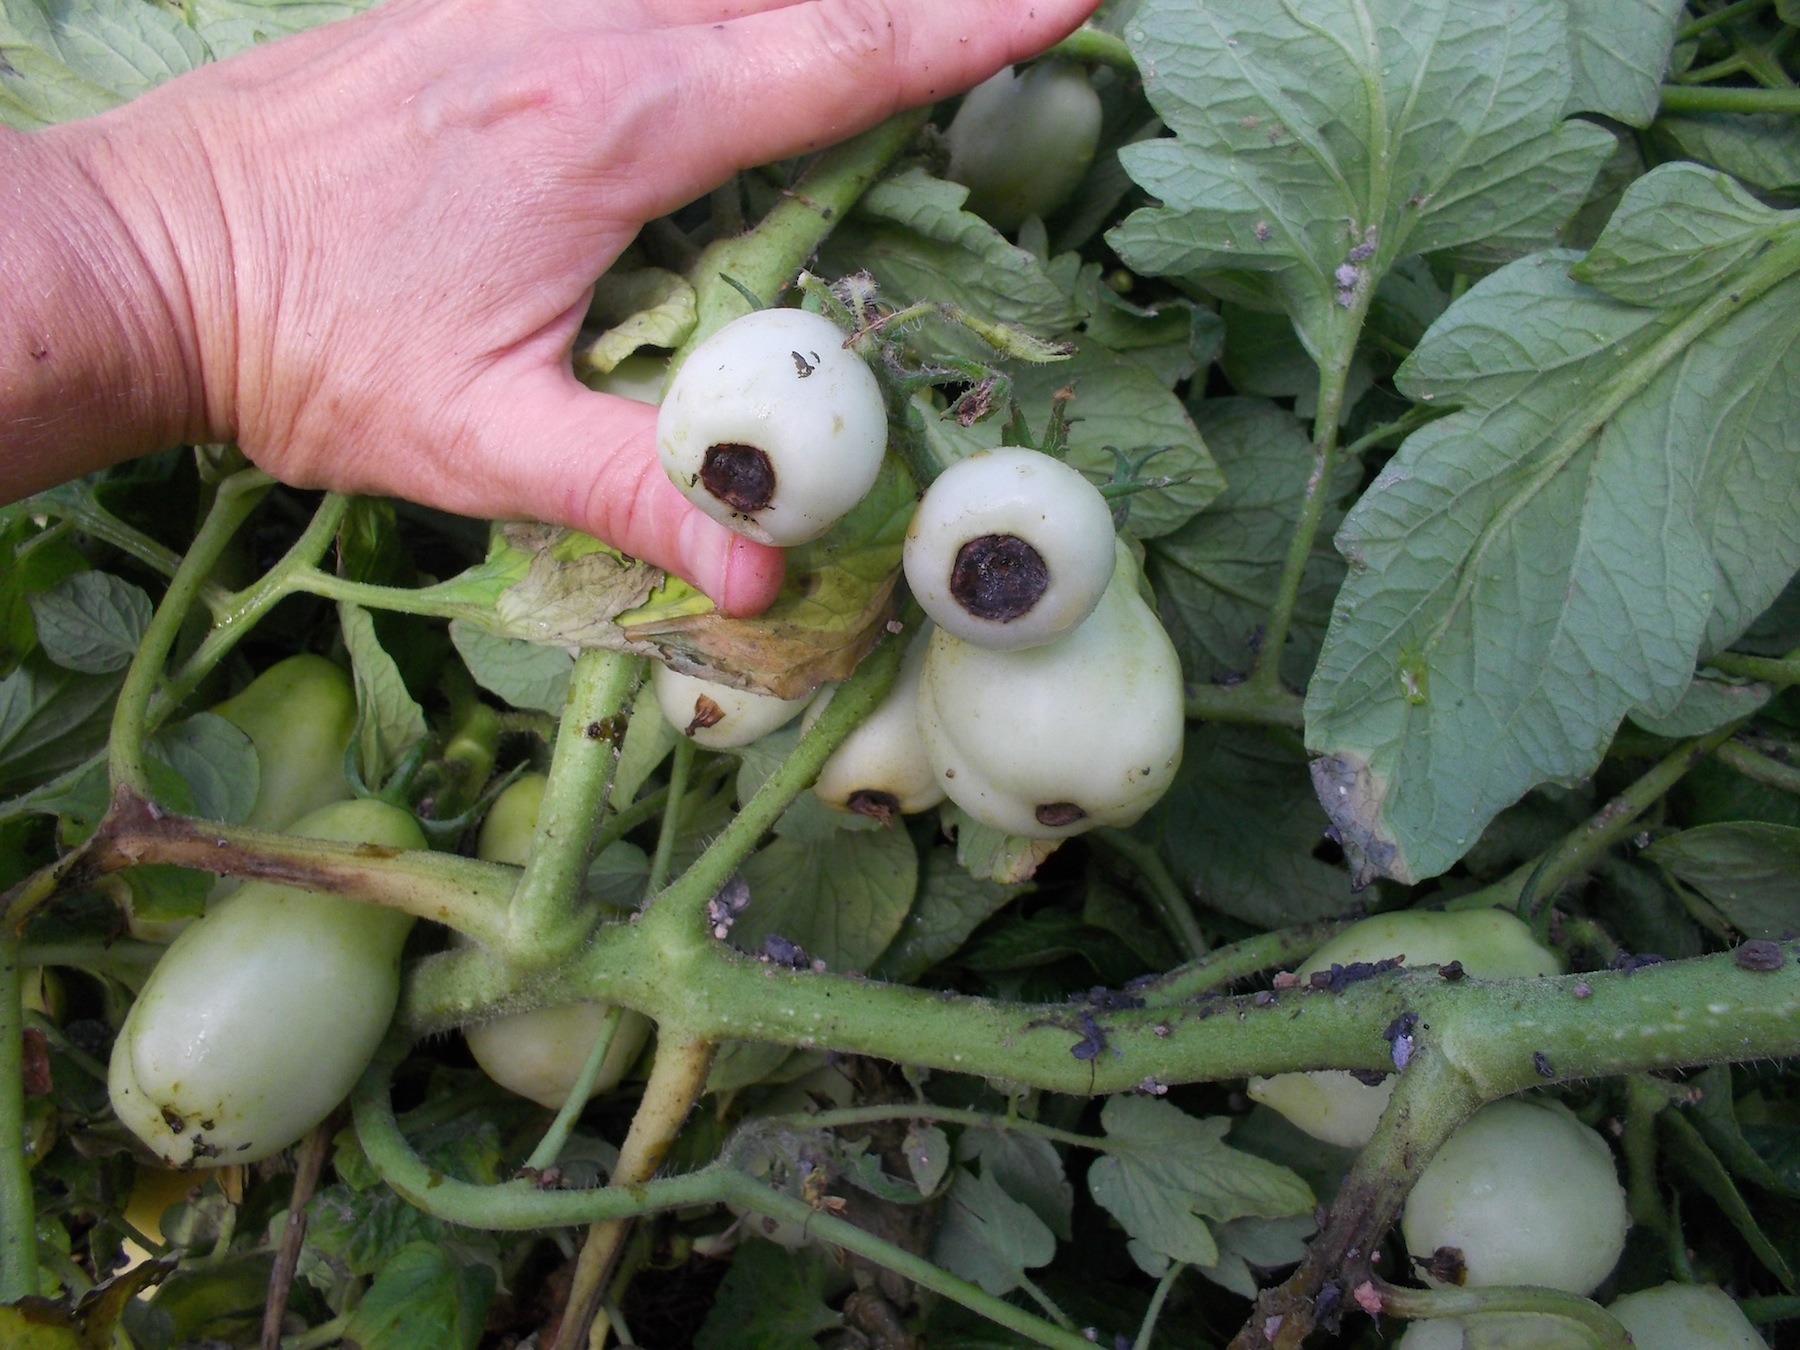 Quart STOP Blossom-End Rot of Tomatoes 